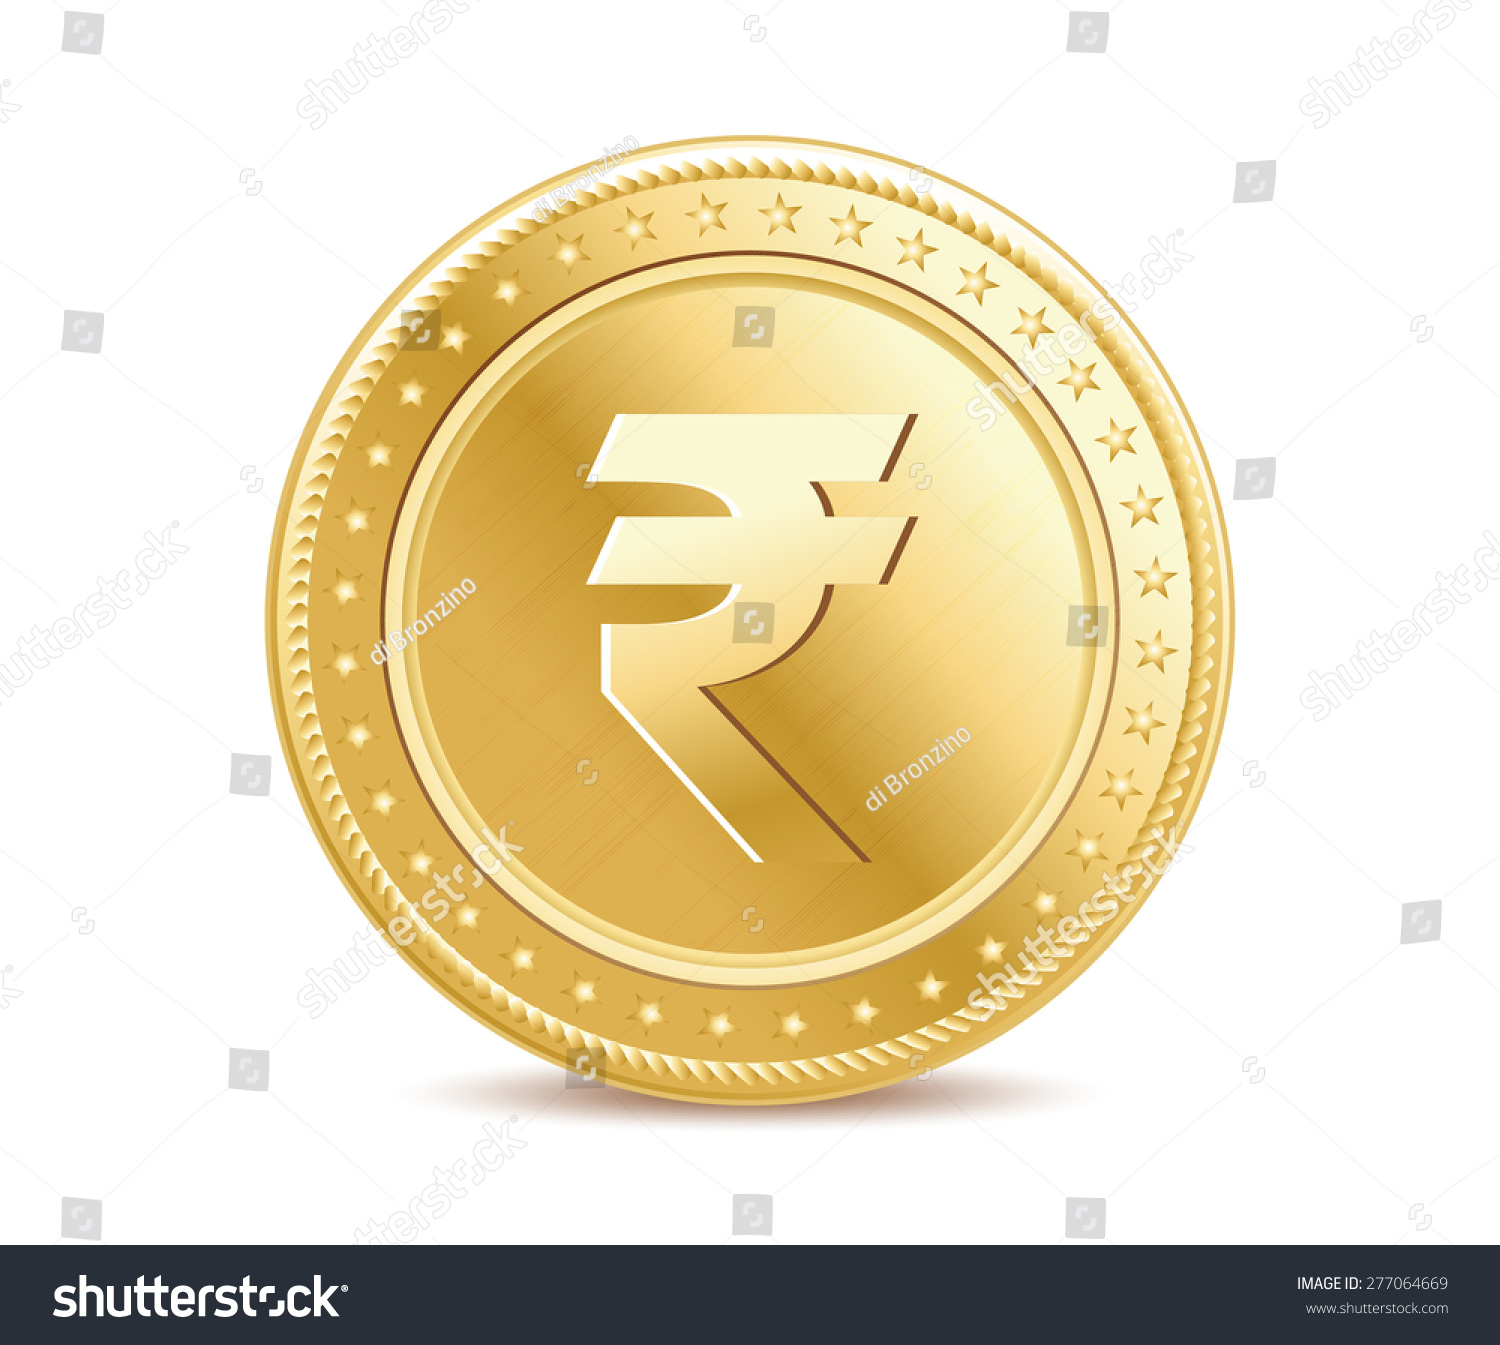 SVG of Golden finance isolated rupee coin on the white background svg